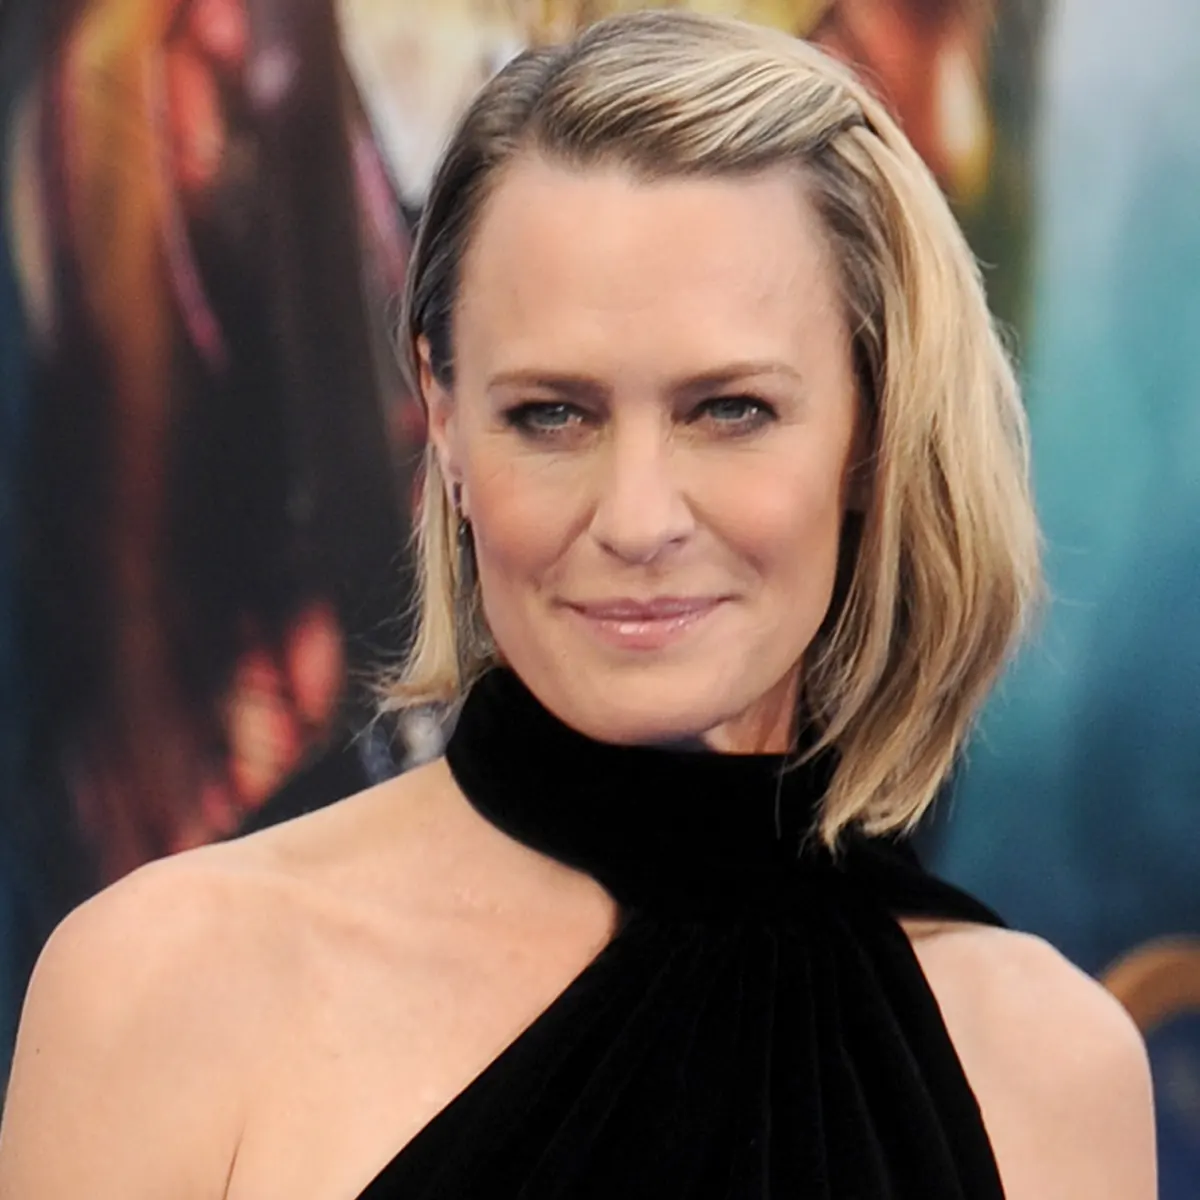 30 Interesting Things Most People Don’t Know About Robin Wright